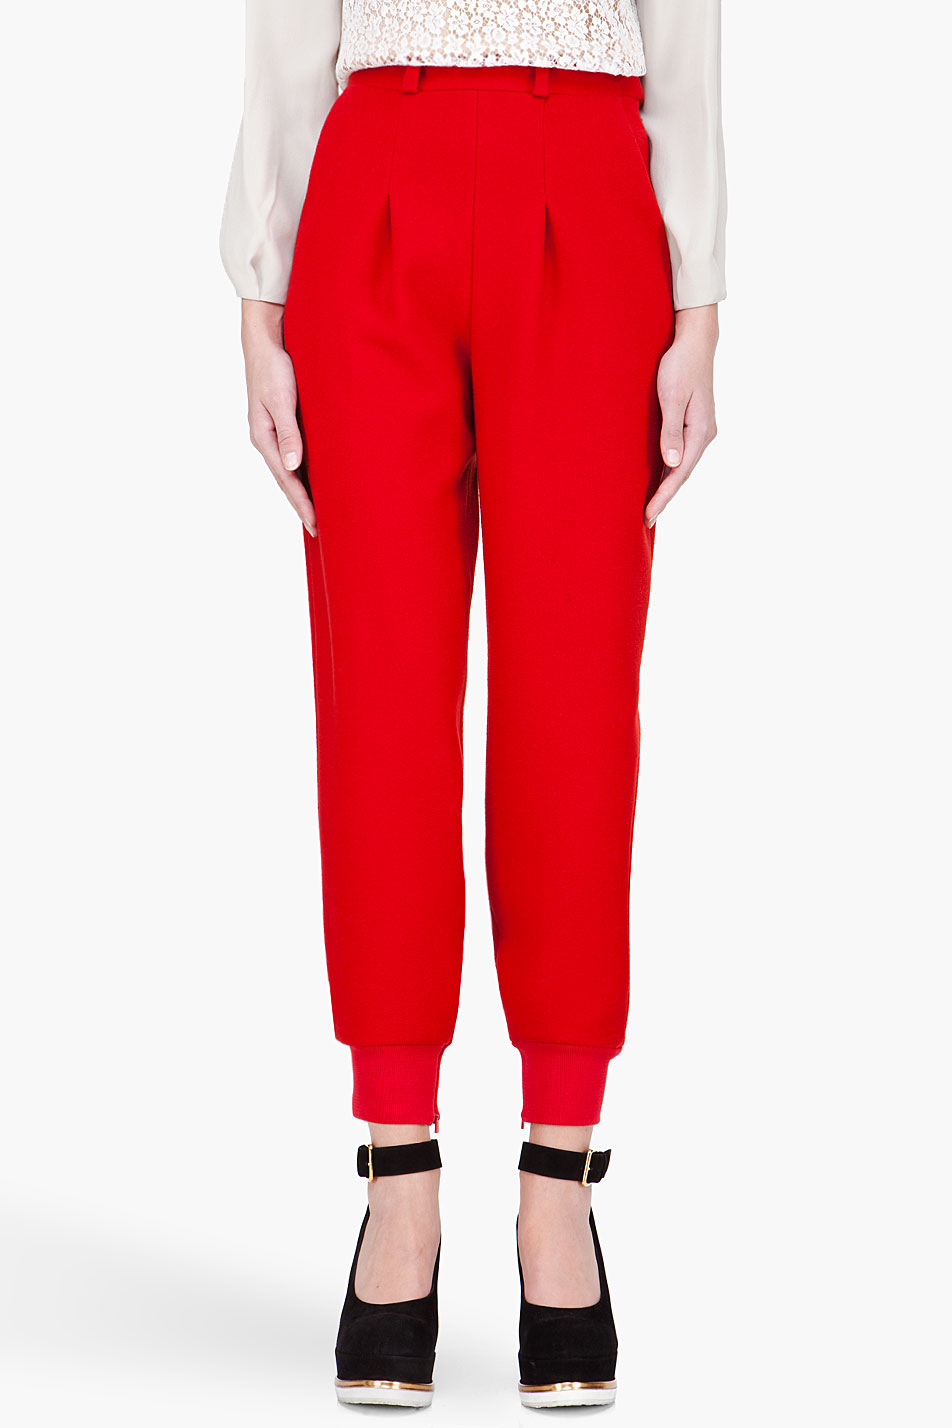 Chloé High Waisted Wool Lounge Pants in Red | Lyst